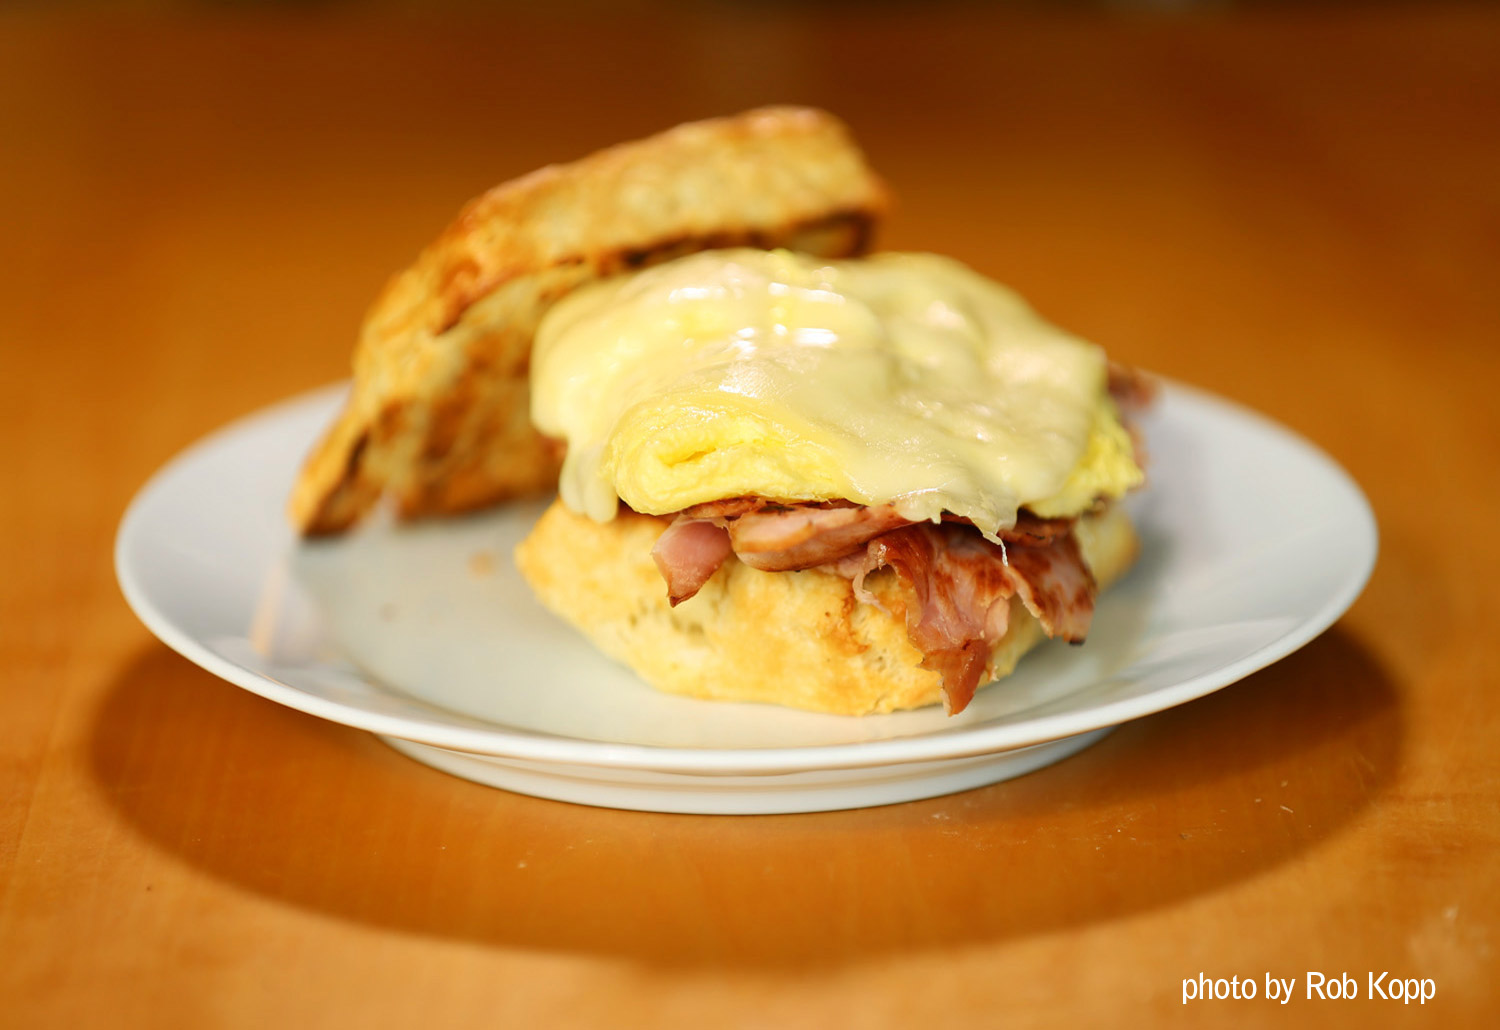 Biscuit Sandwich - Egg, Meat & Cheese